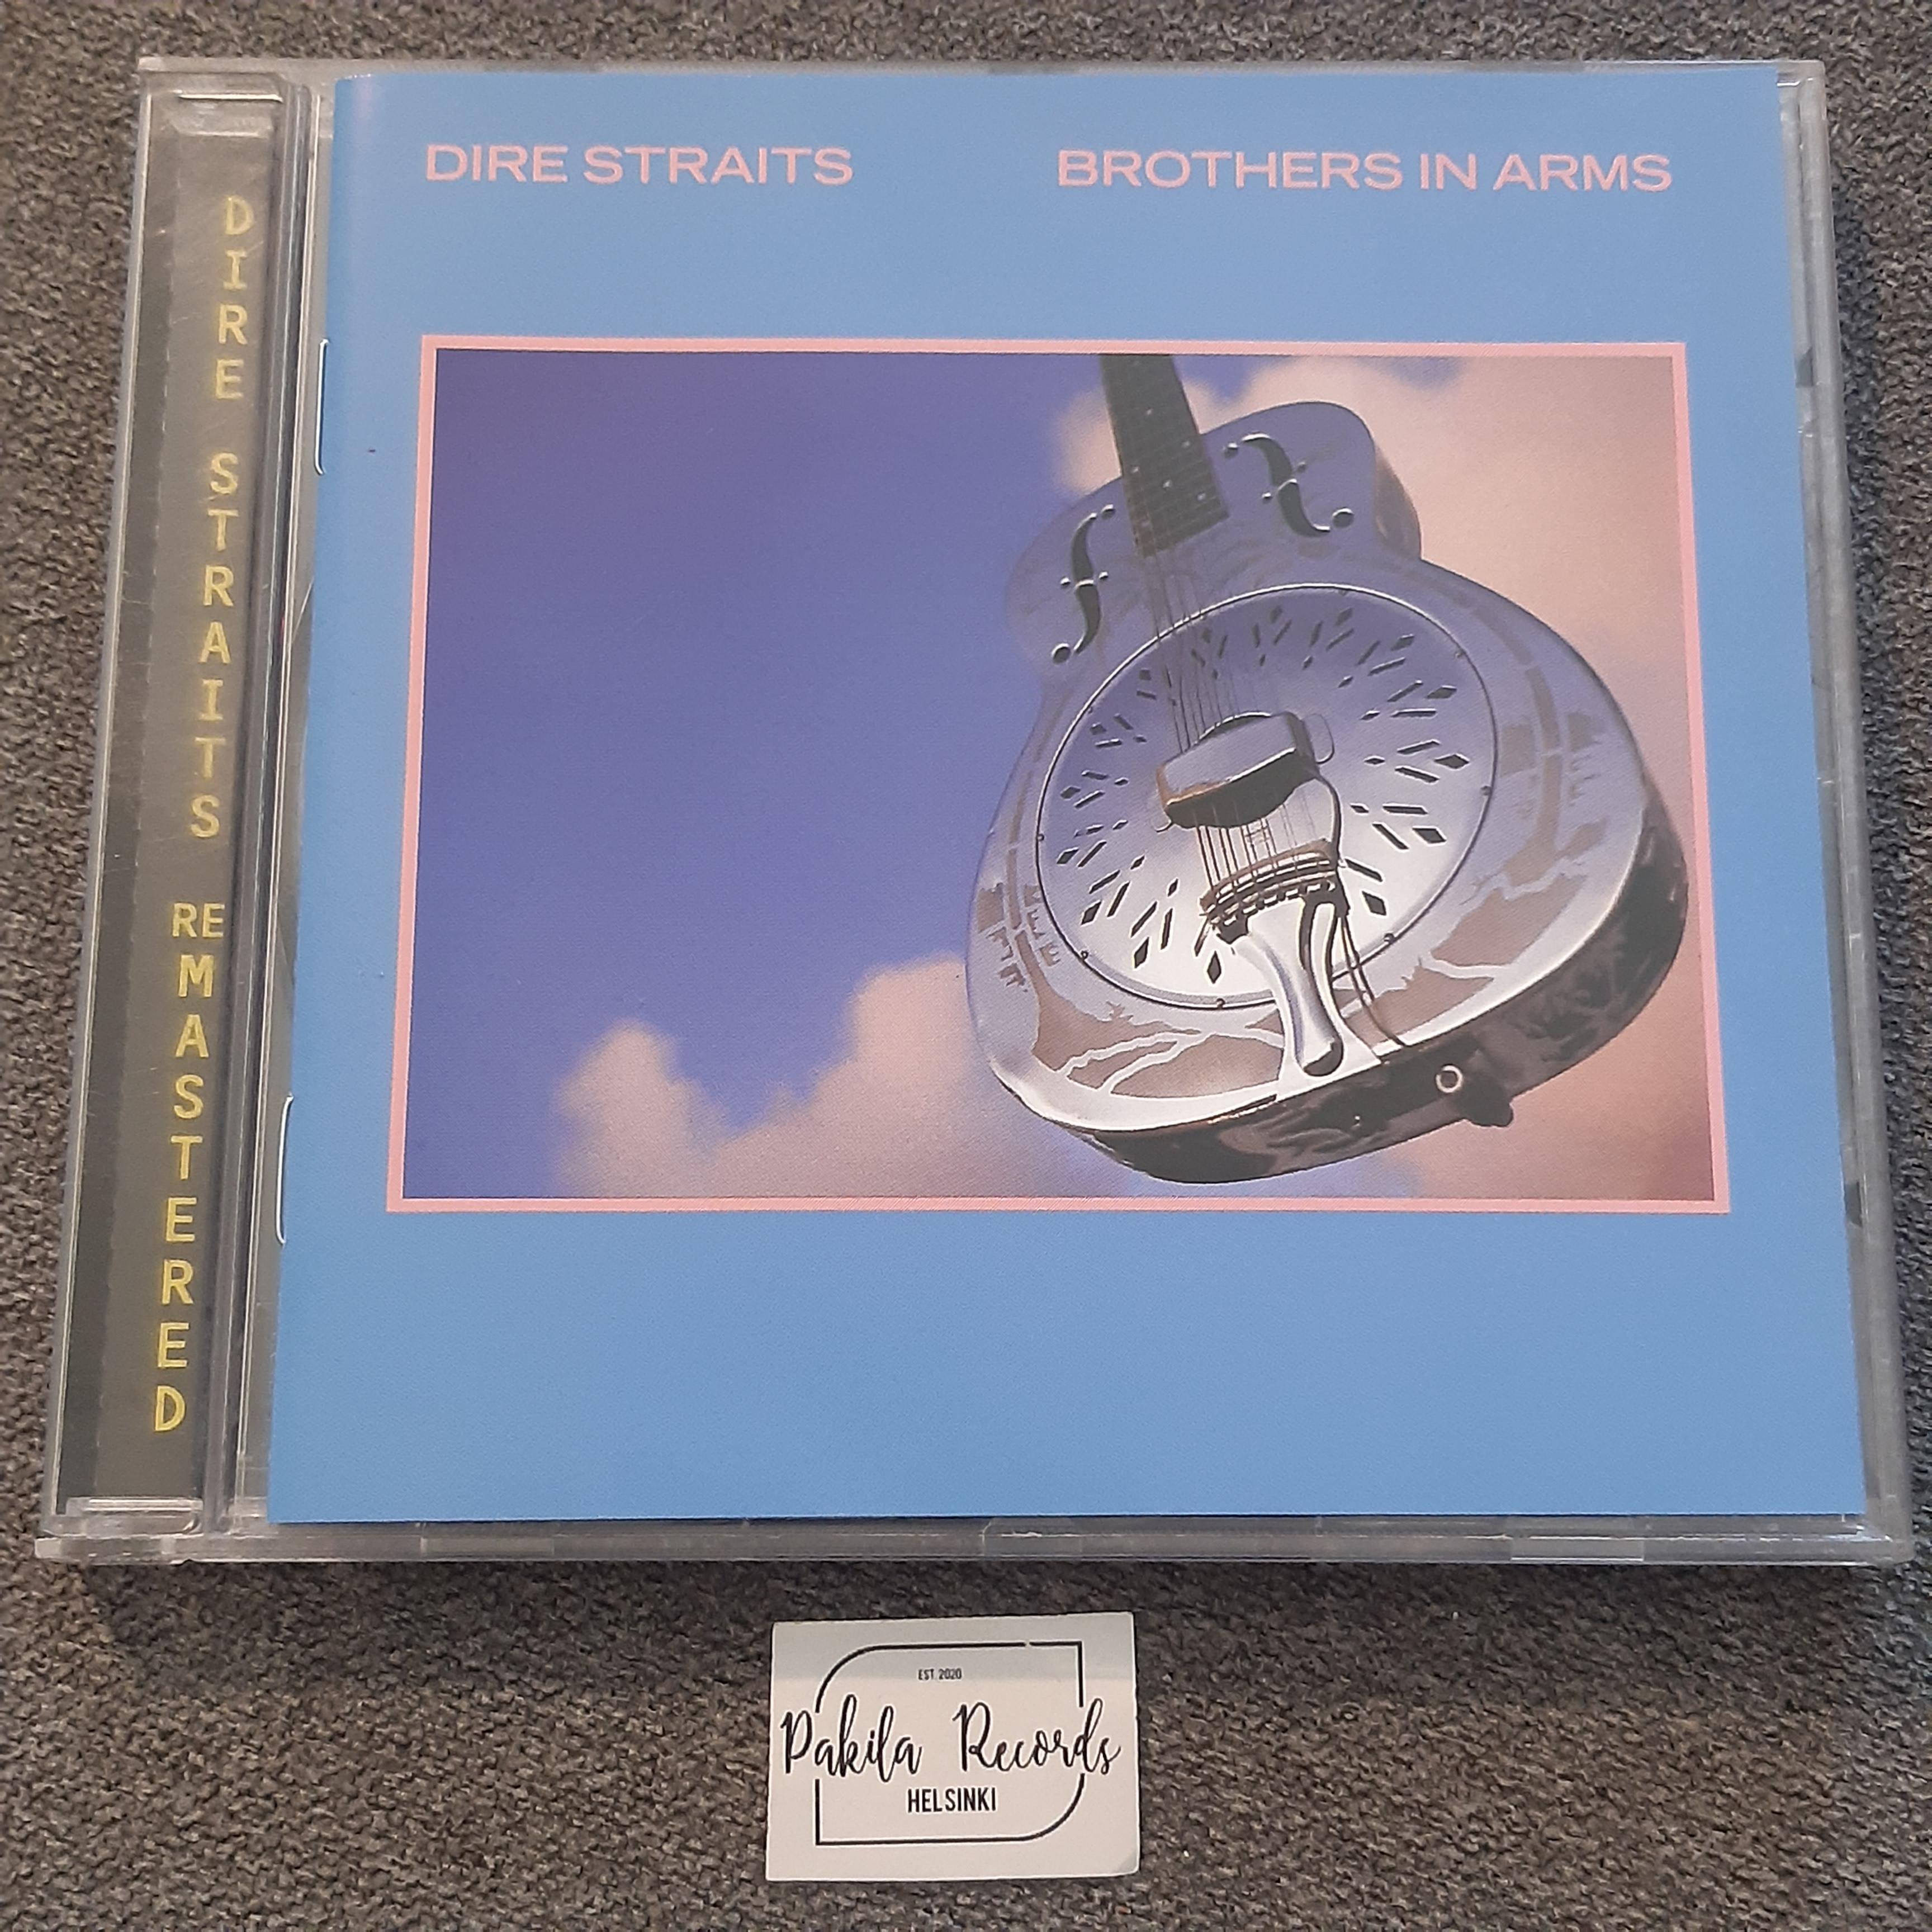 Dire Straits - Brothers In Arms, Remastered - CD (käytetty)